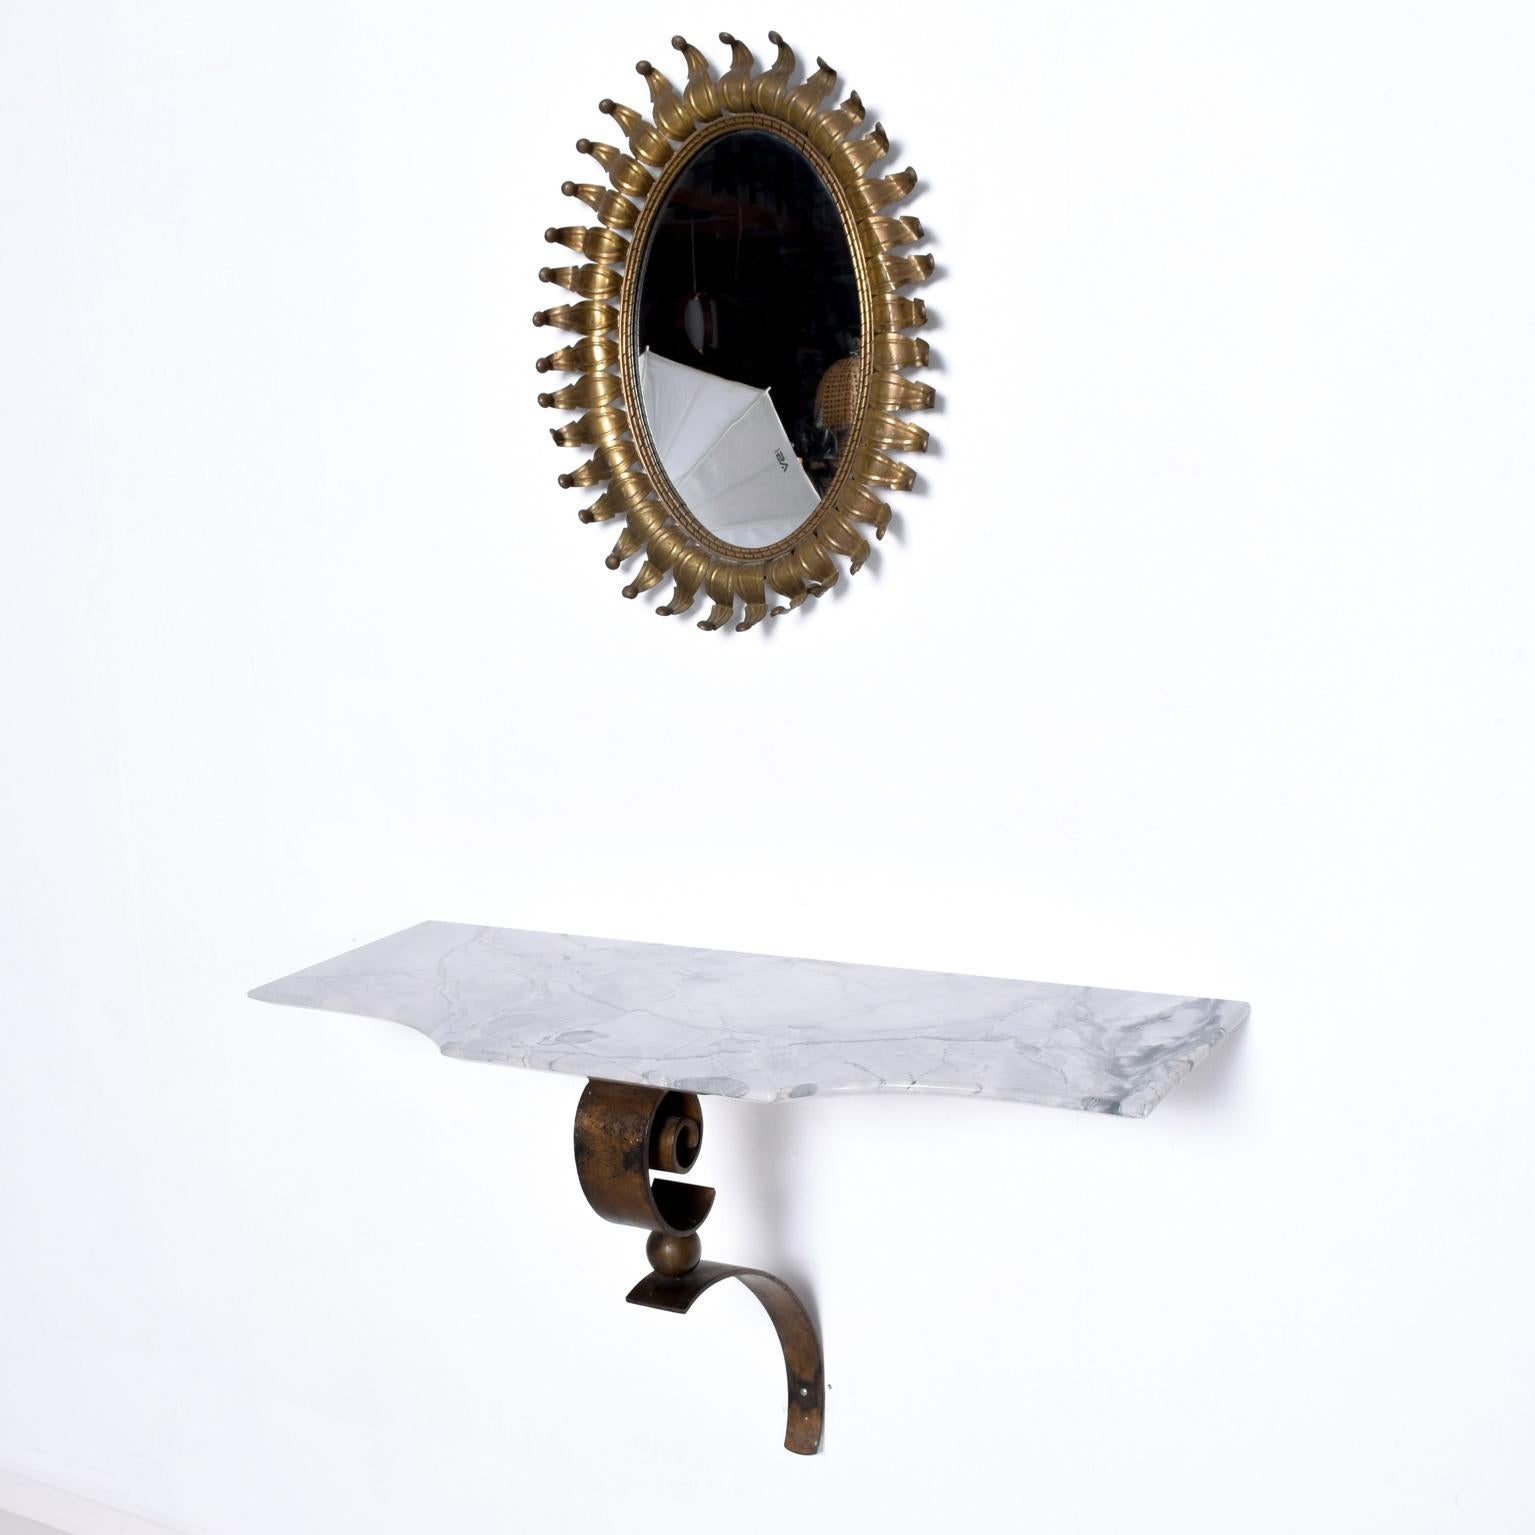 We are pleased to offer for your consideration, a stunning wall console constructed with forged iron, bronze and gray marble. The iron frame has a gold leaf patinated finish with a bronze ball in the center. The top is made Italian marble with gray